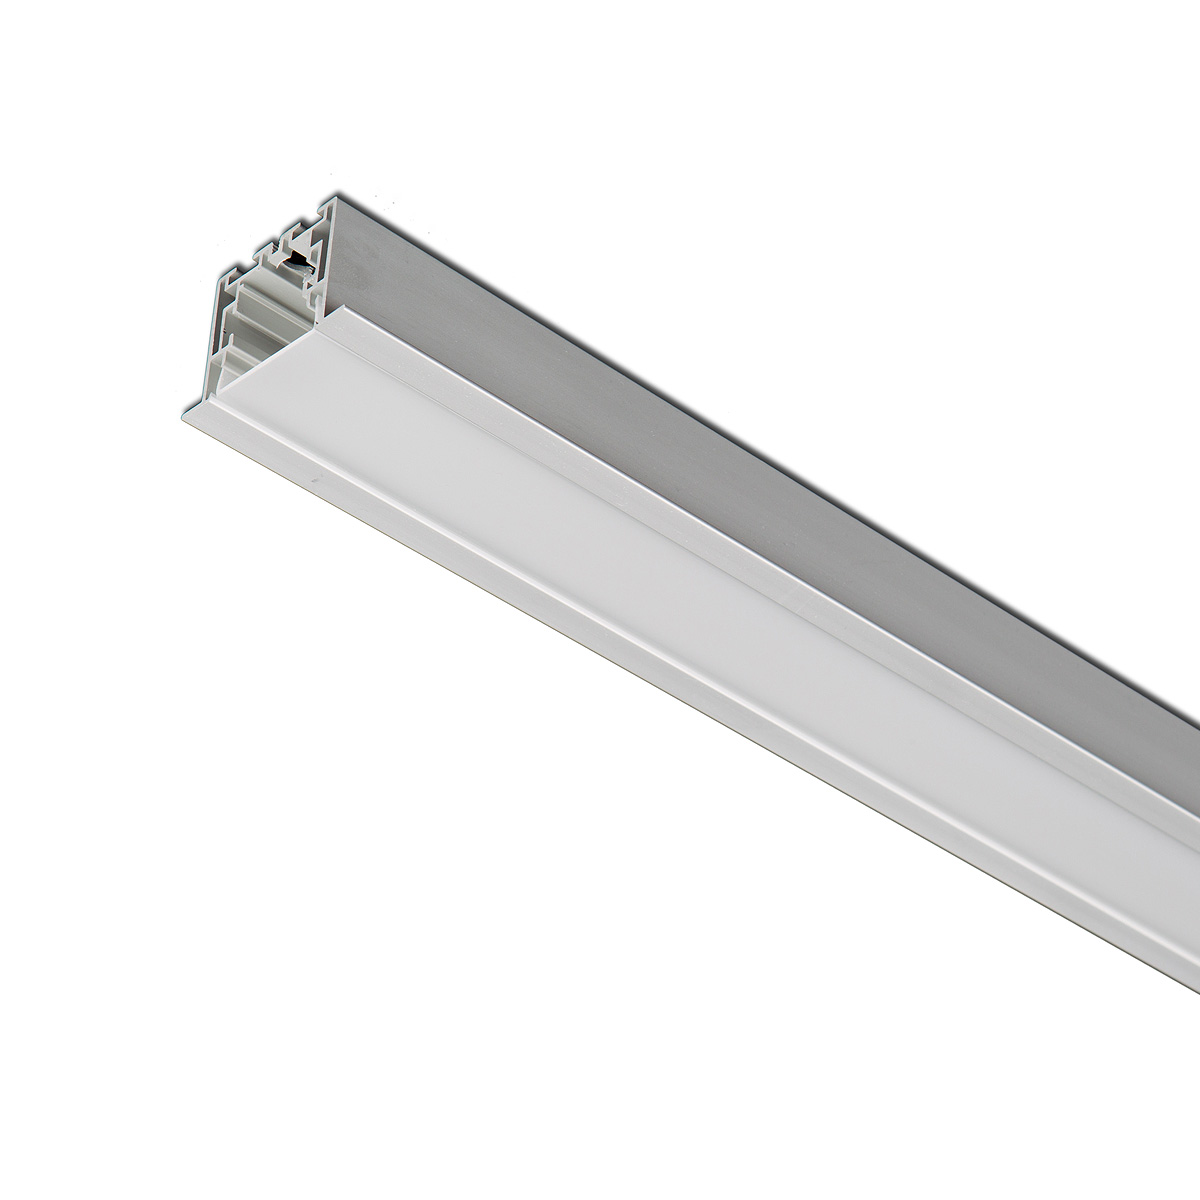 LED Linear 2.16” with Flange for Hard Ceiling